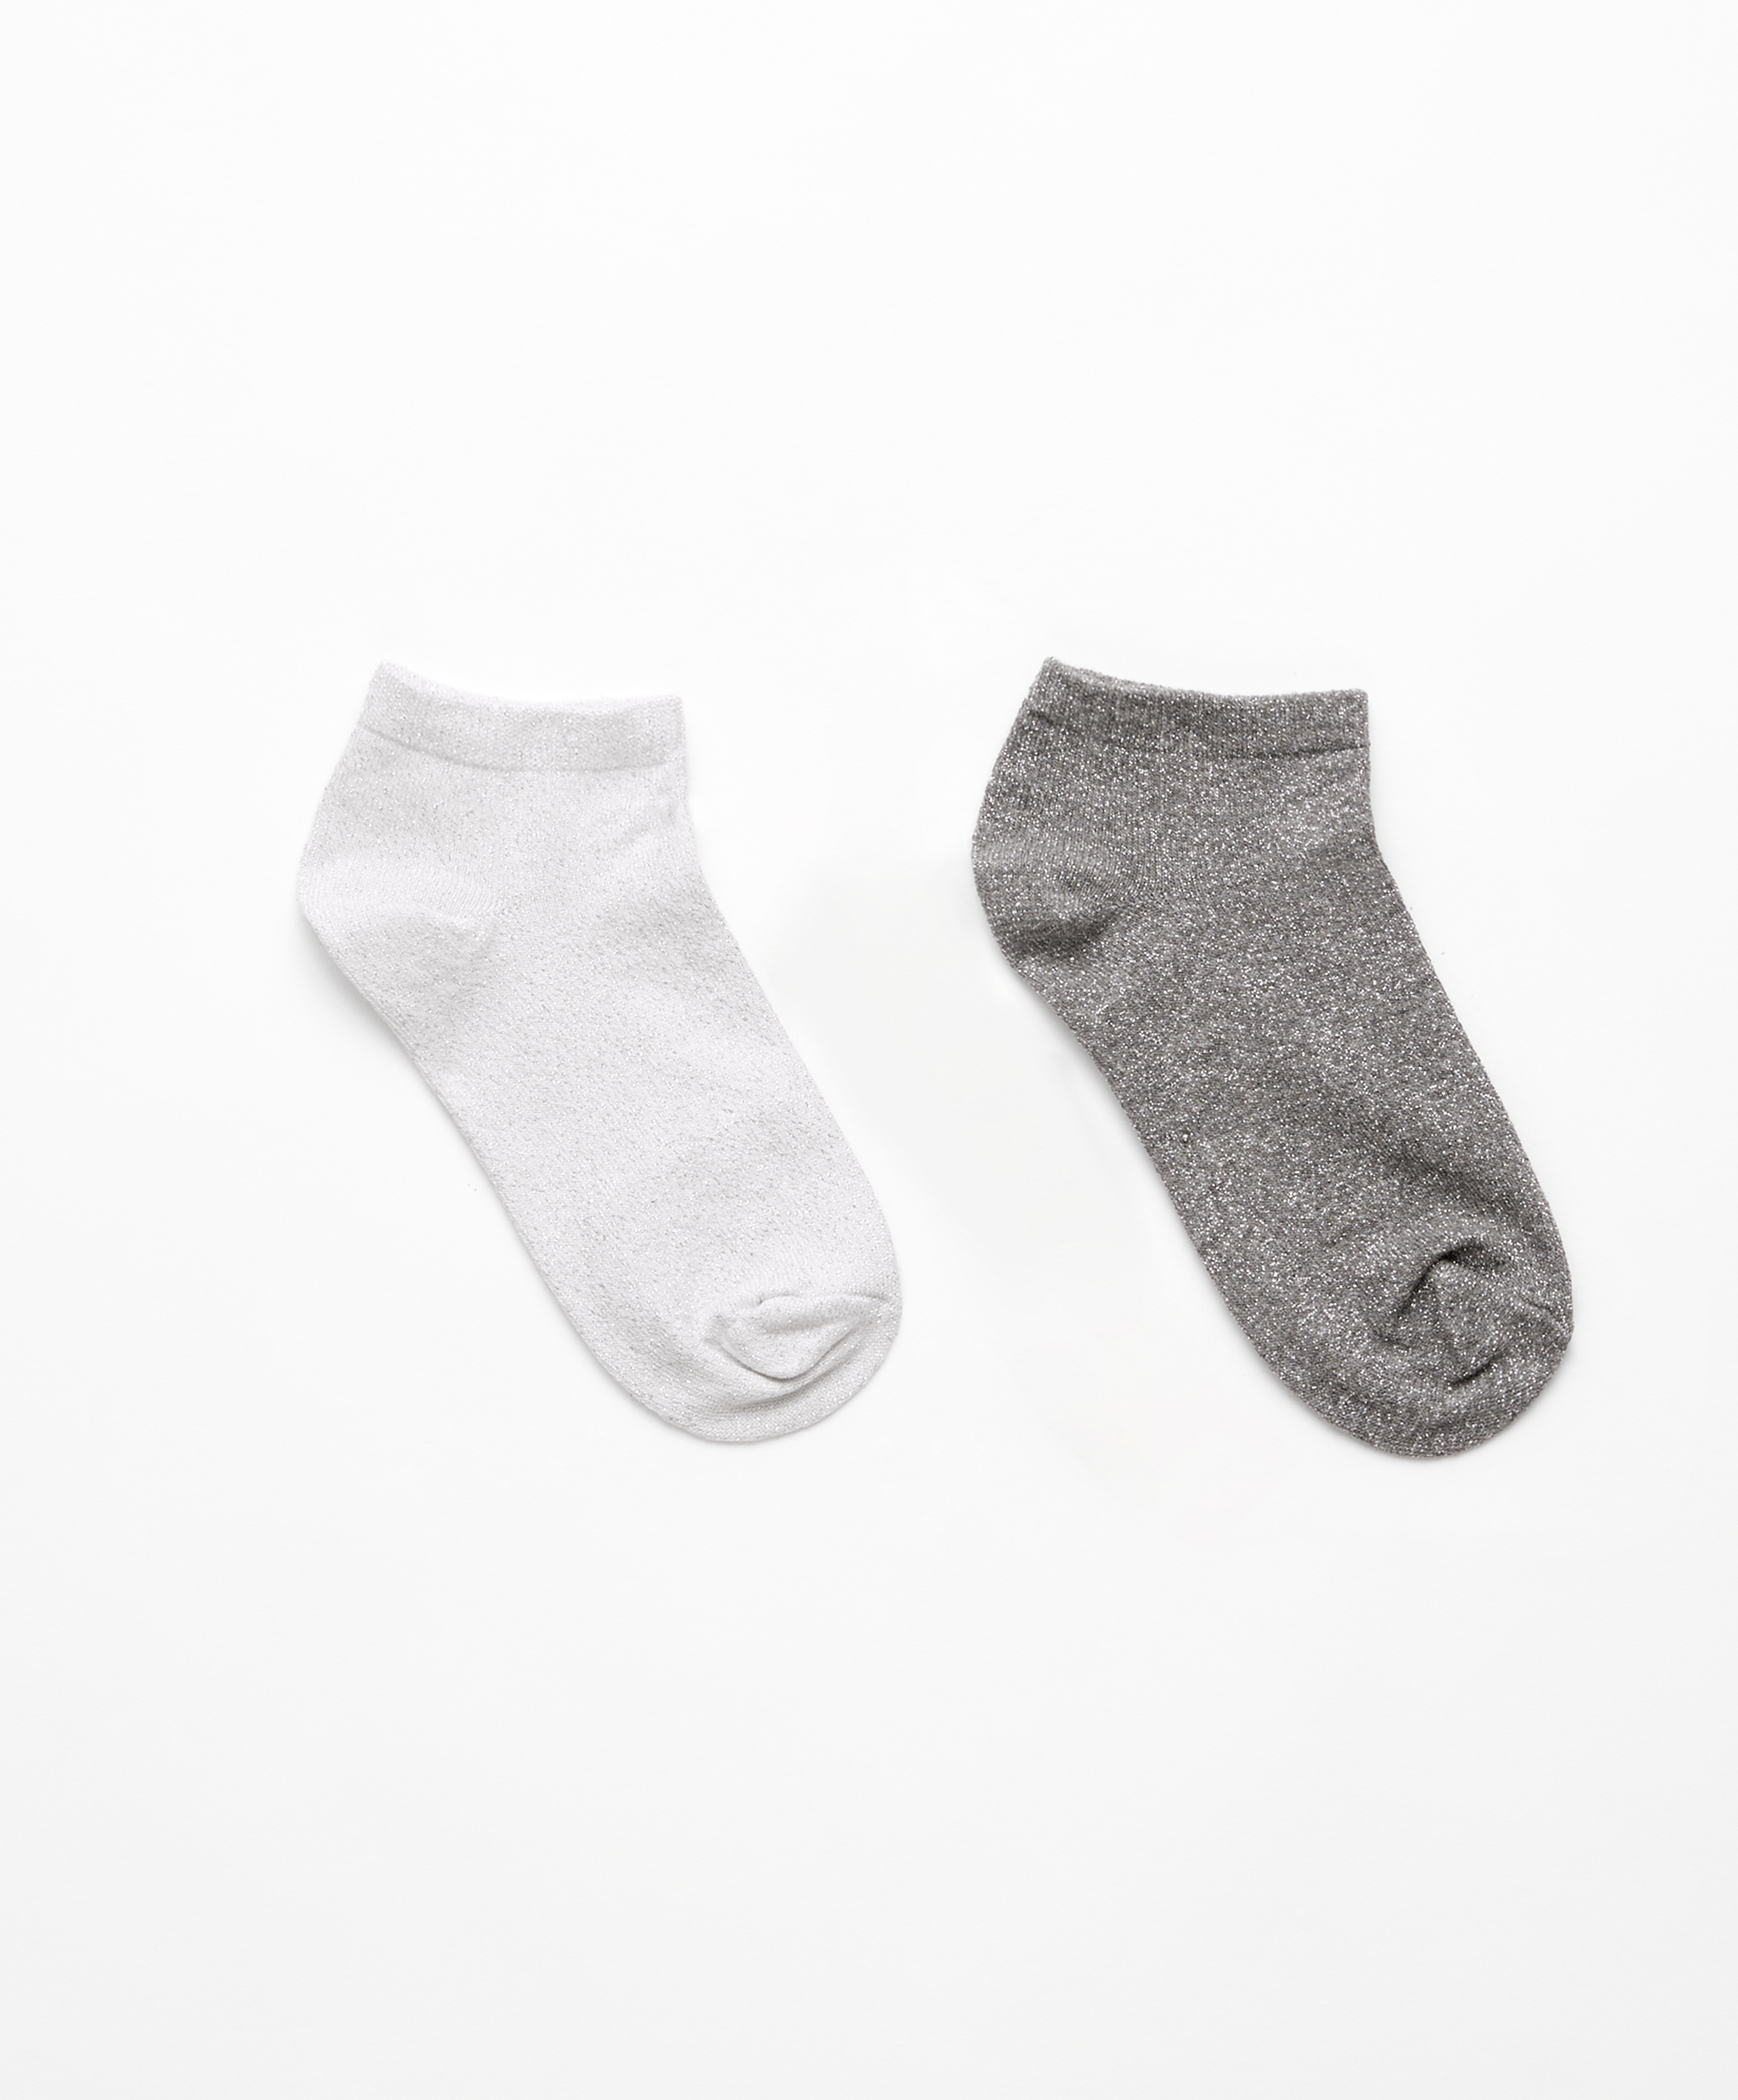 2 pairs of sneaker socks in cotton with metallic thread